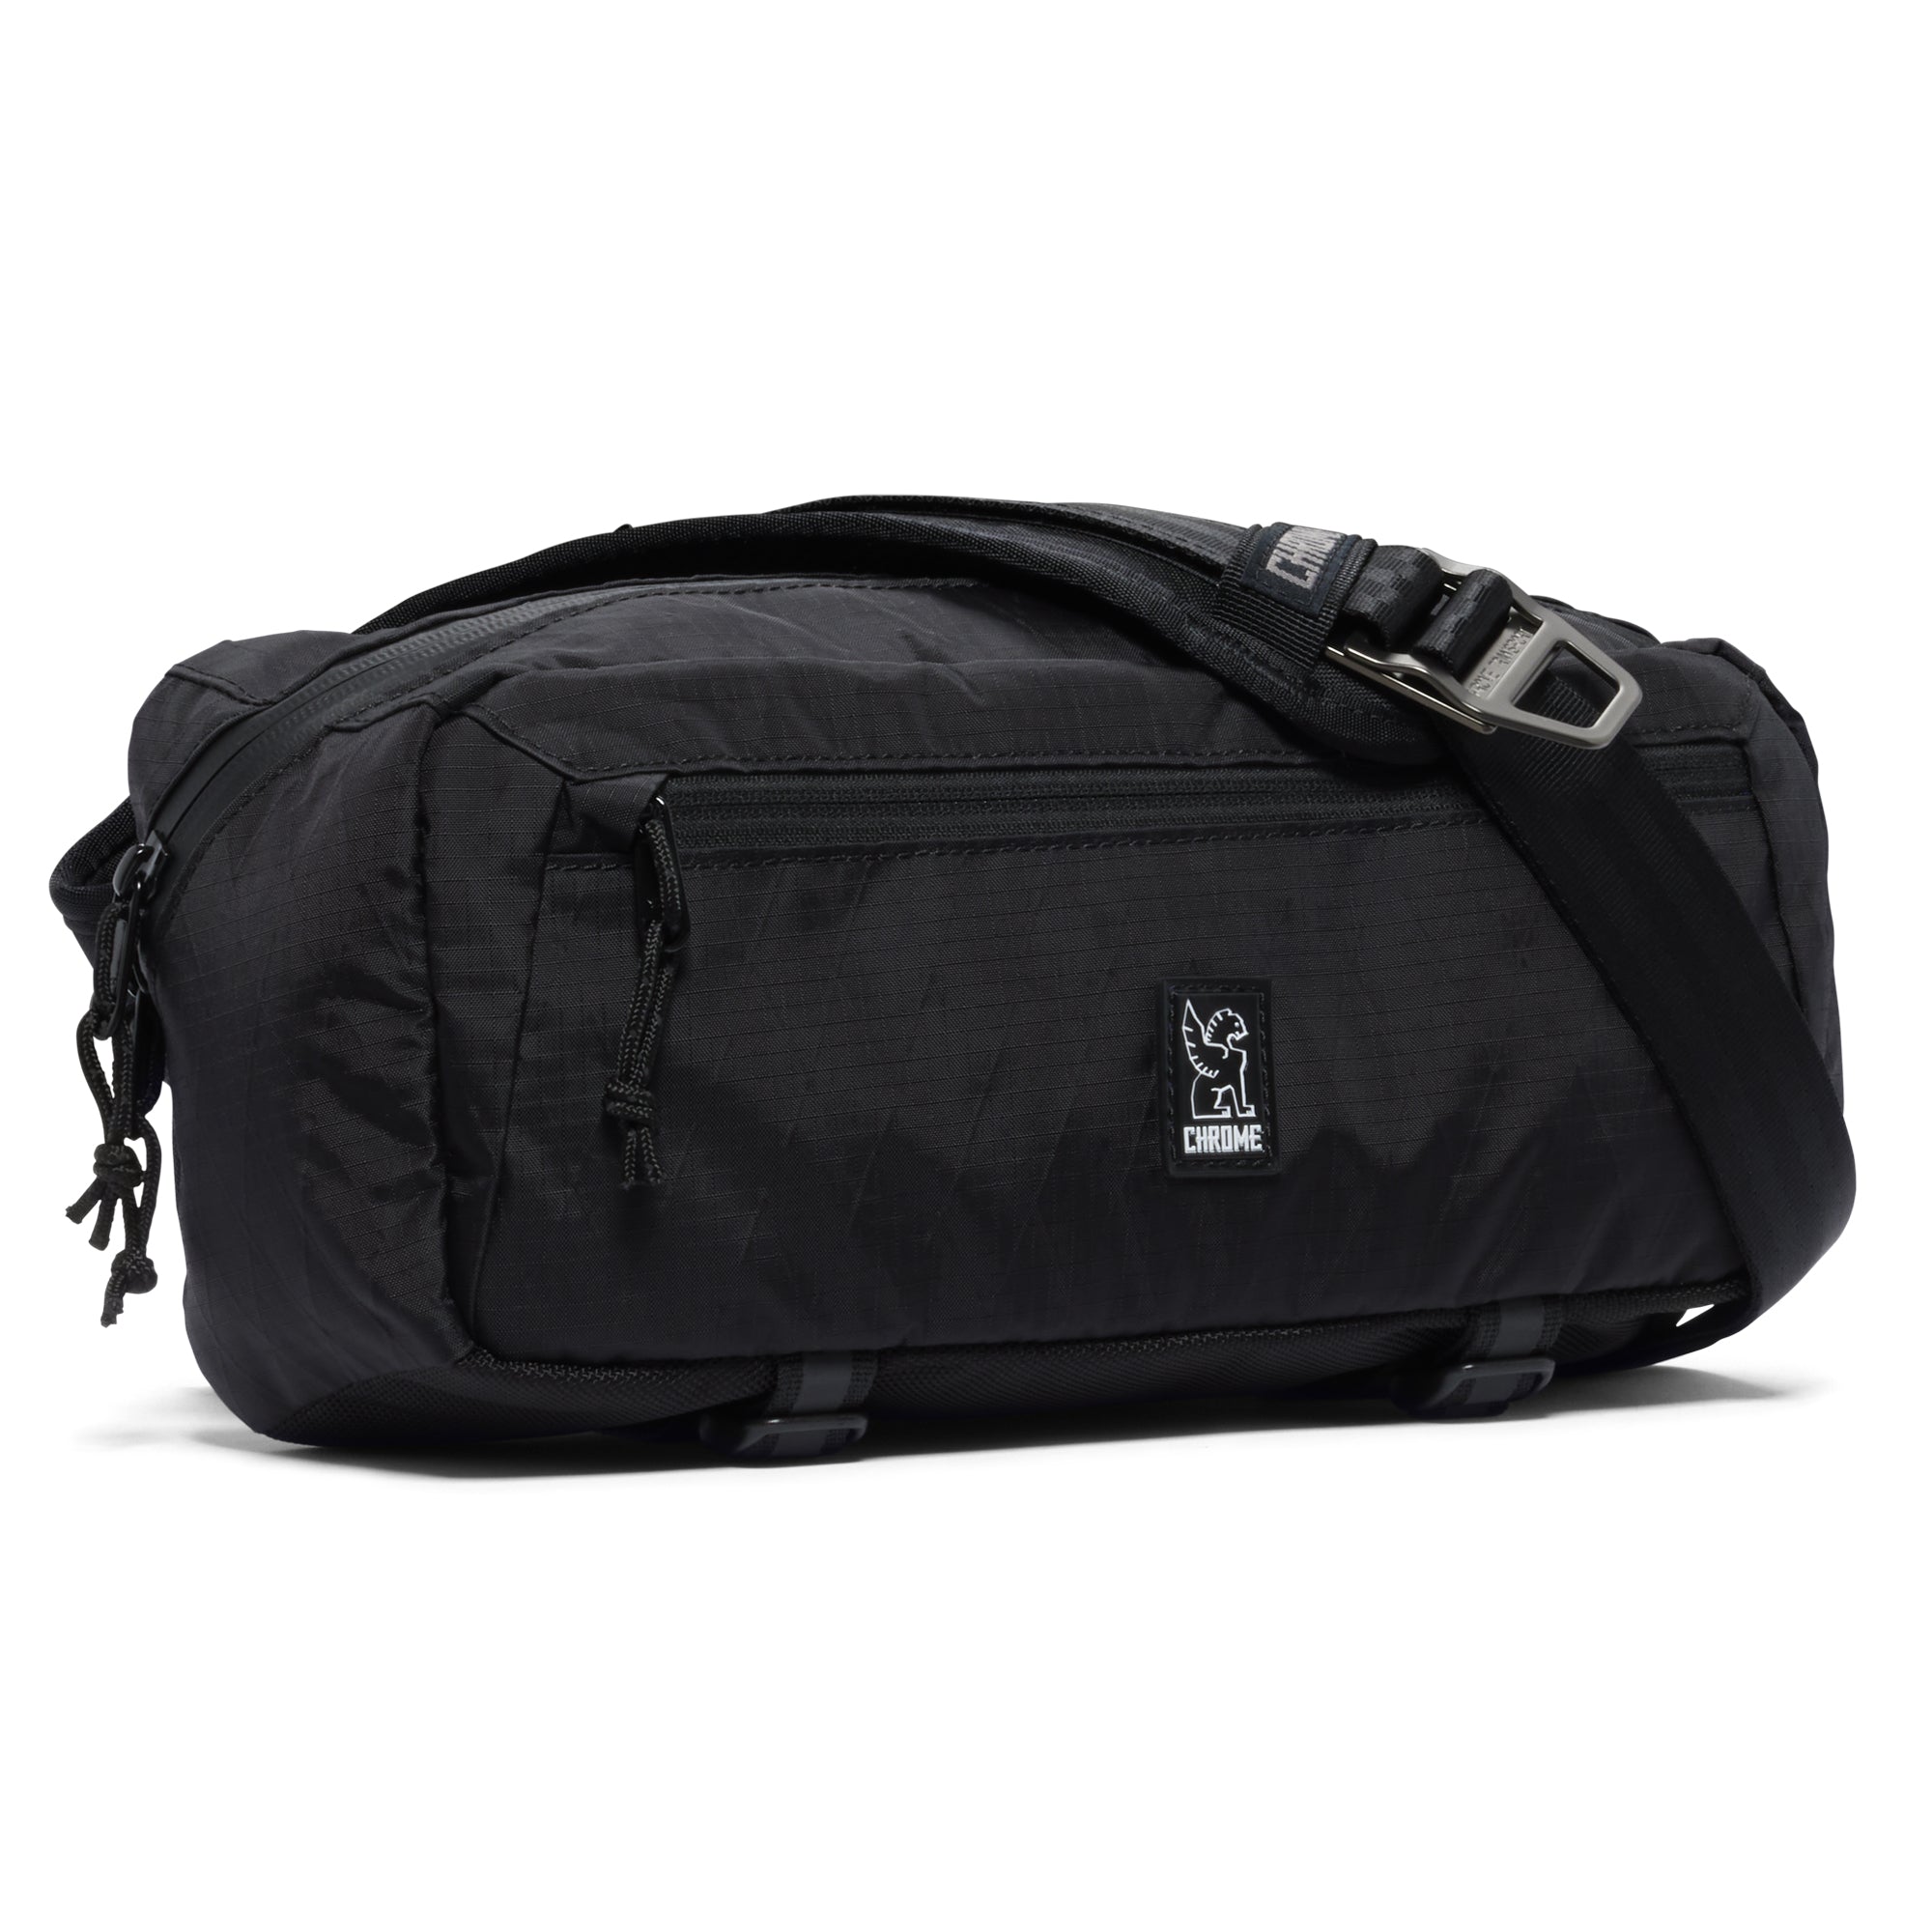 Kadet Sling LTD in Black X with swappable buckle technology